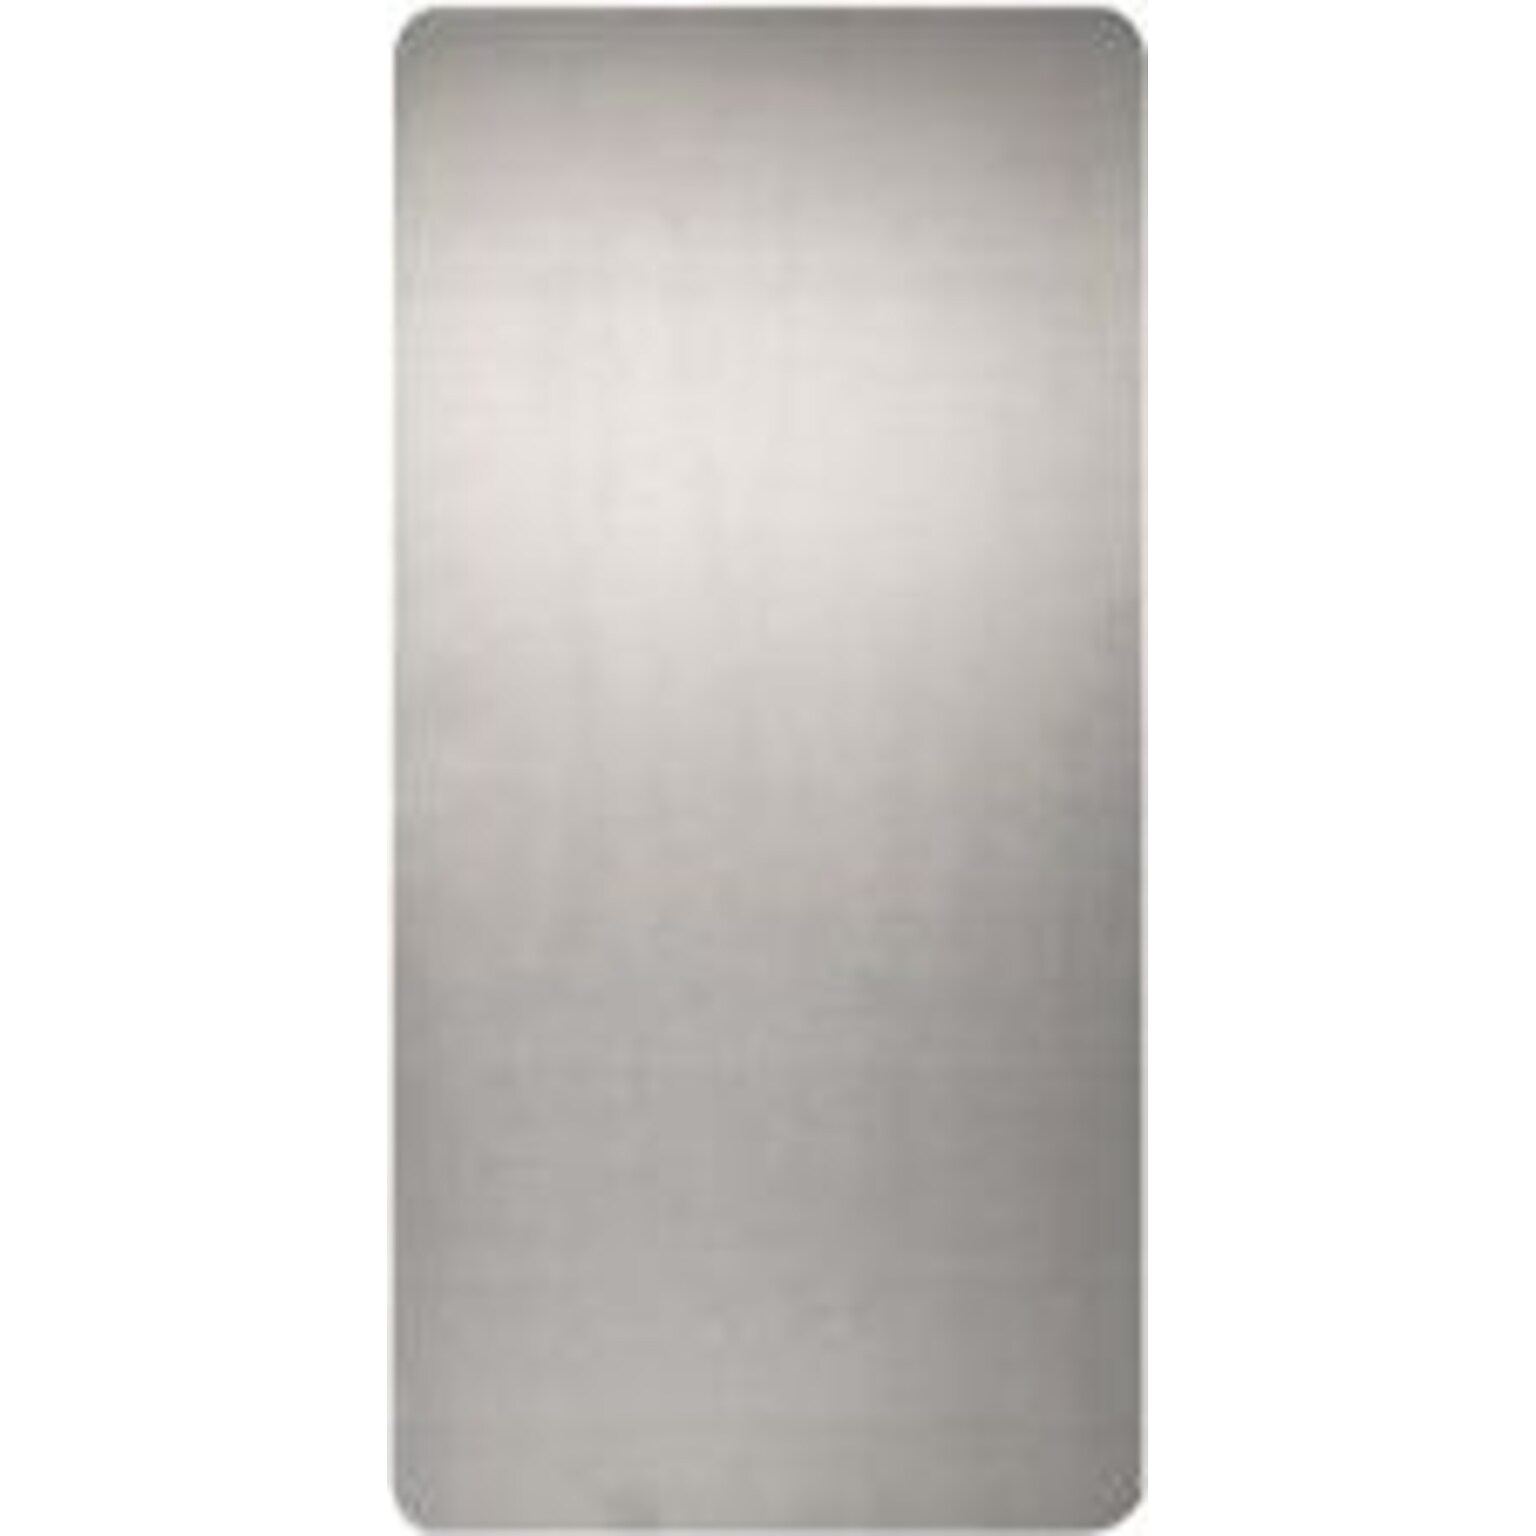 XLERATOR® Hand Dryer Wall Guard, Stainless Steel, 2/ST